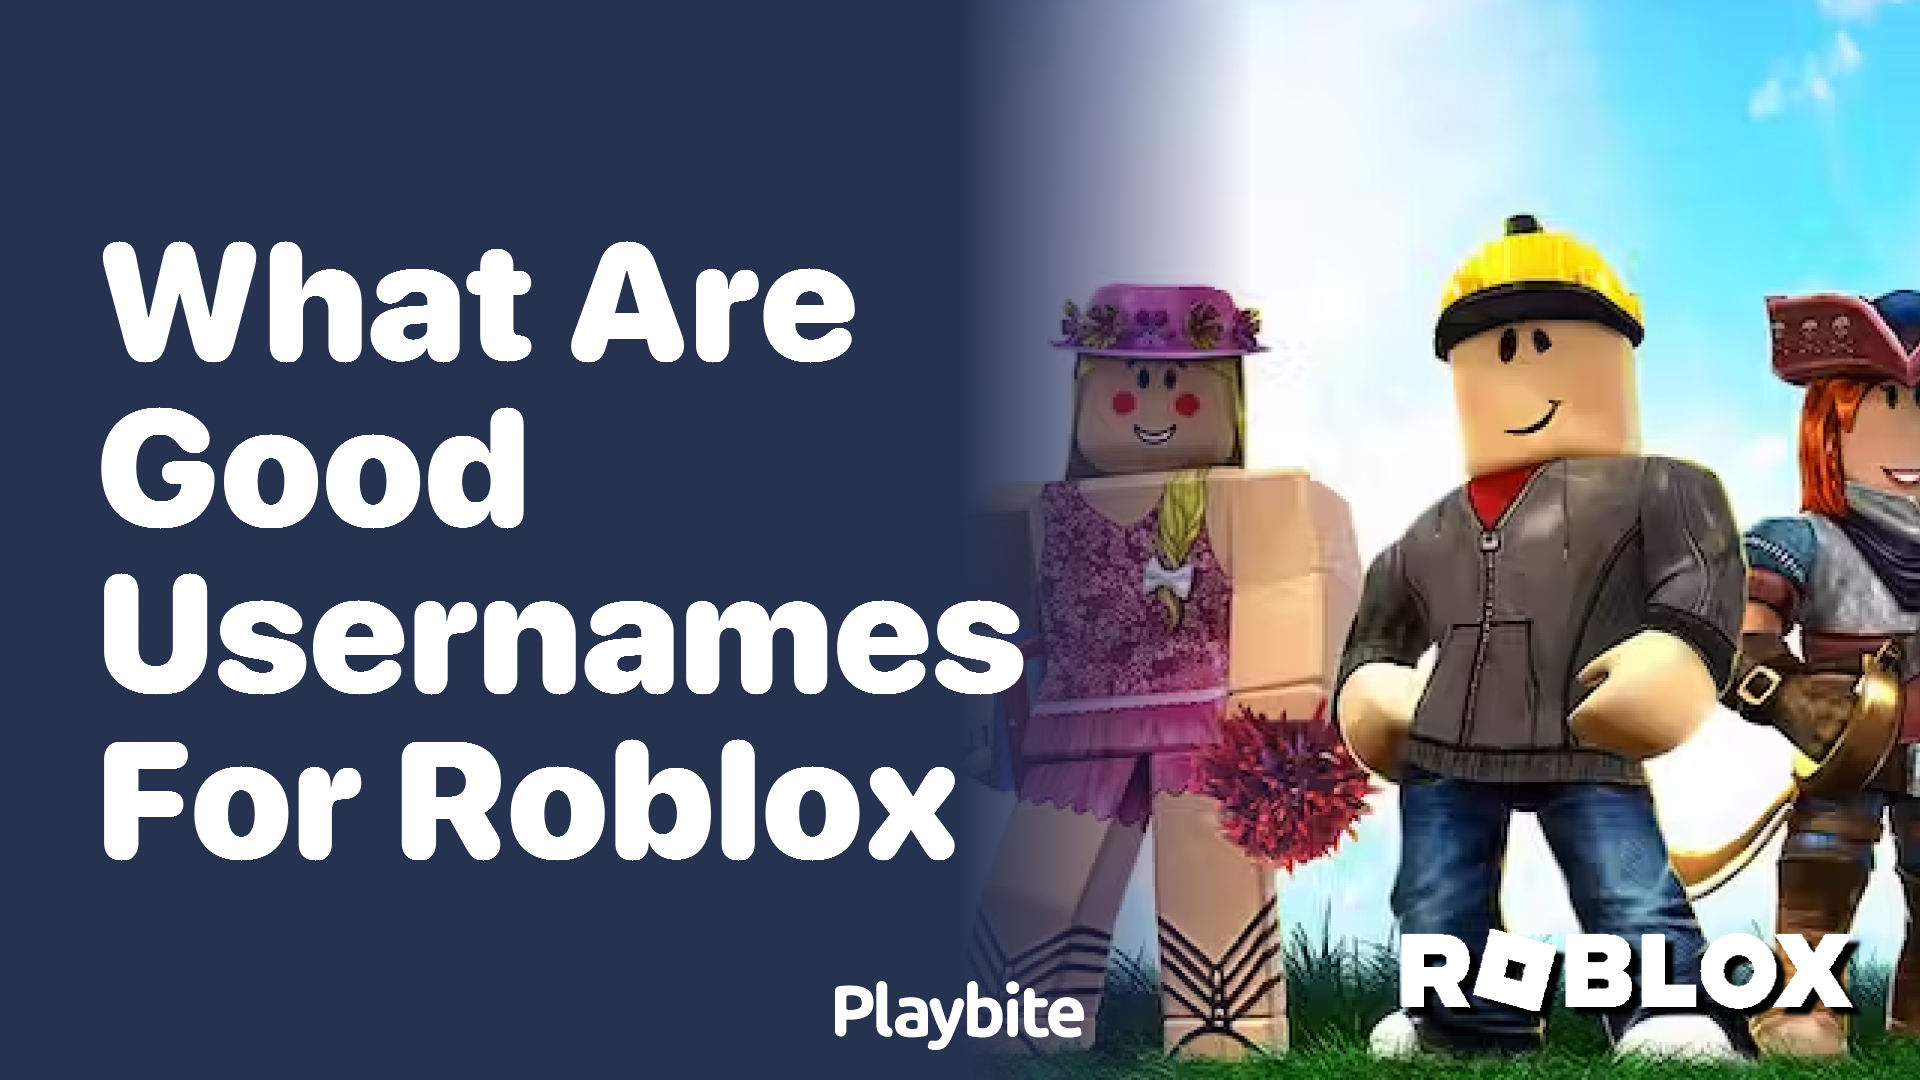 What Are Good Usernames for Roblox? Find Your Perfect Handle!